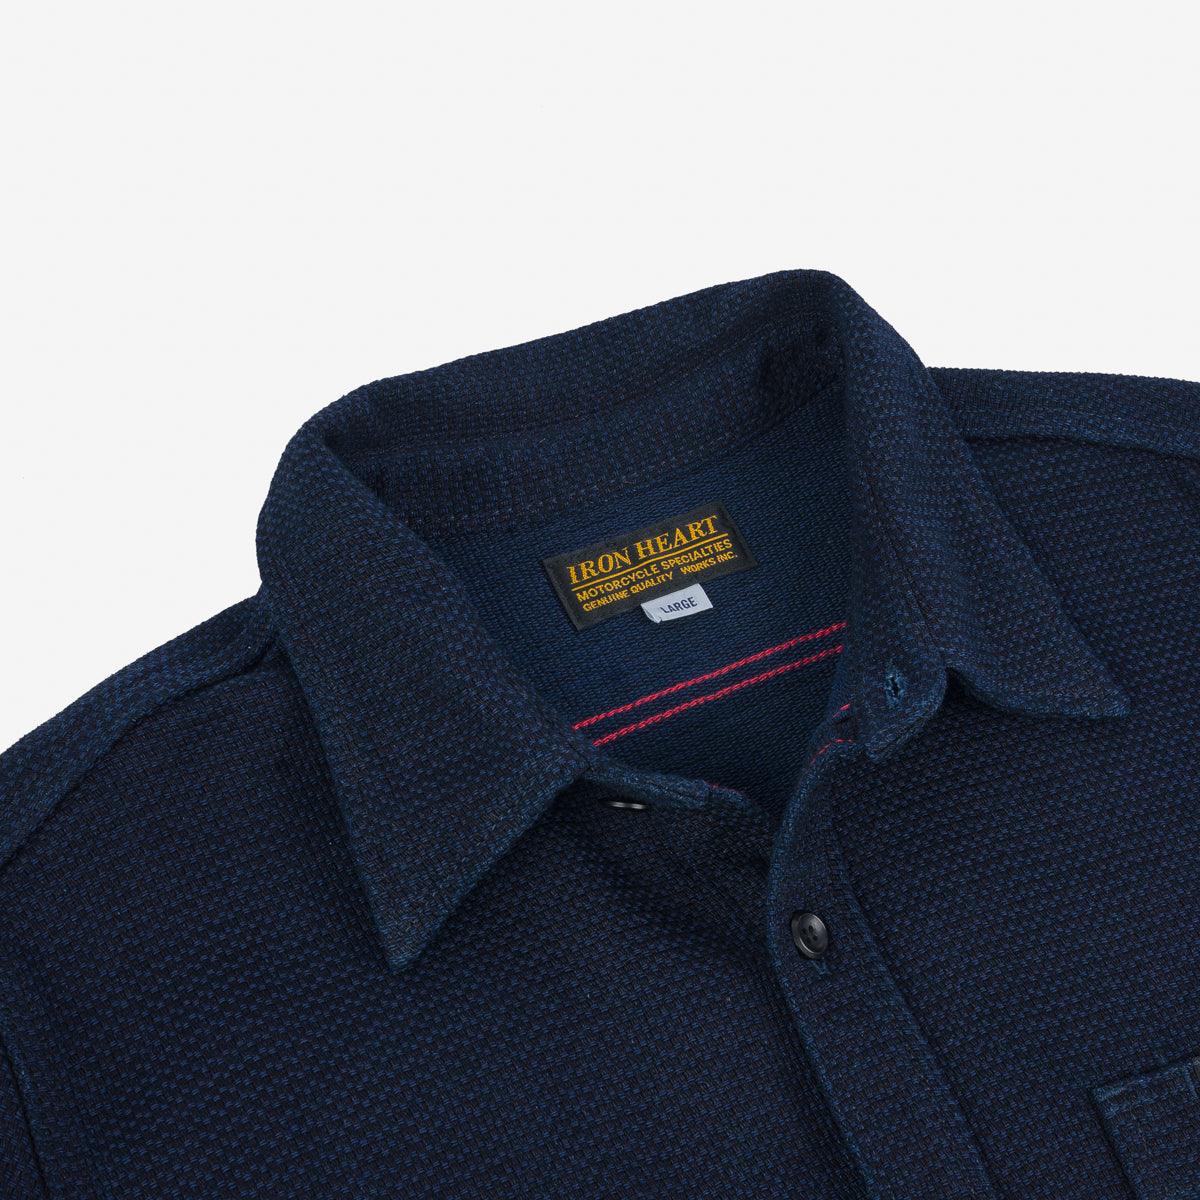 Image showing the IHSH-380-IND - 12oz Dobby Cloth Work Shirt - Indigo which is a Shirts described by the following info SS24 and sold on the IRON HEART GERMANY online store